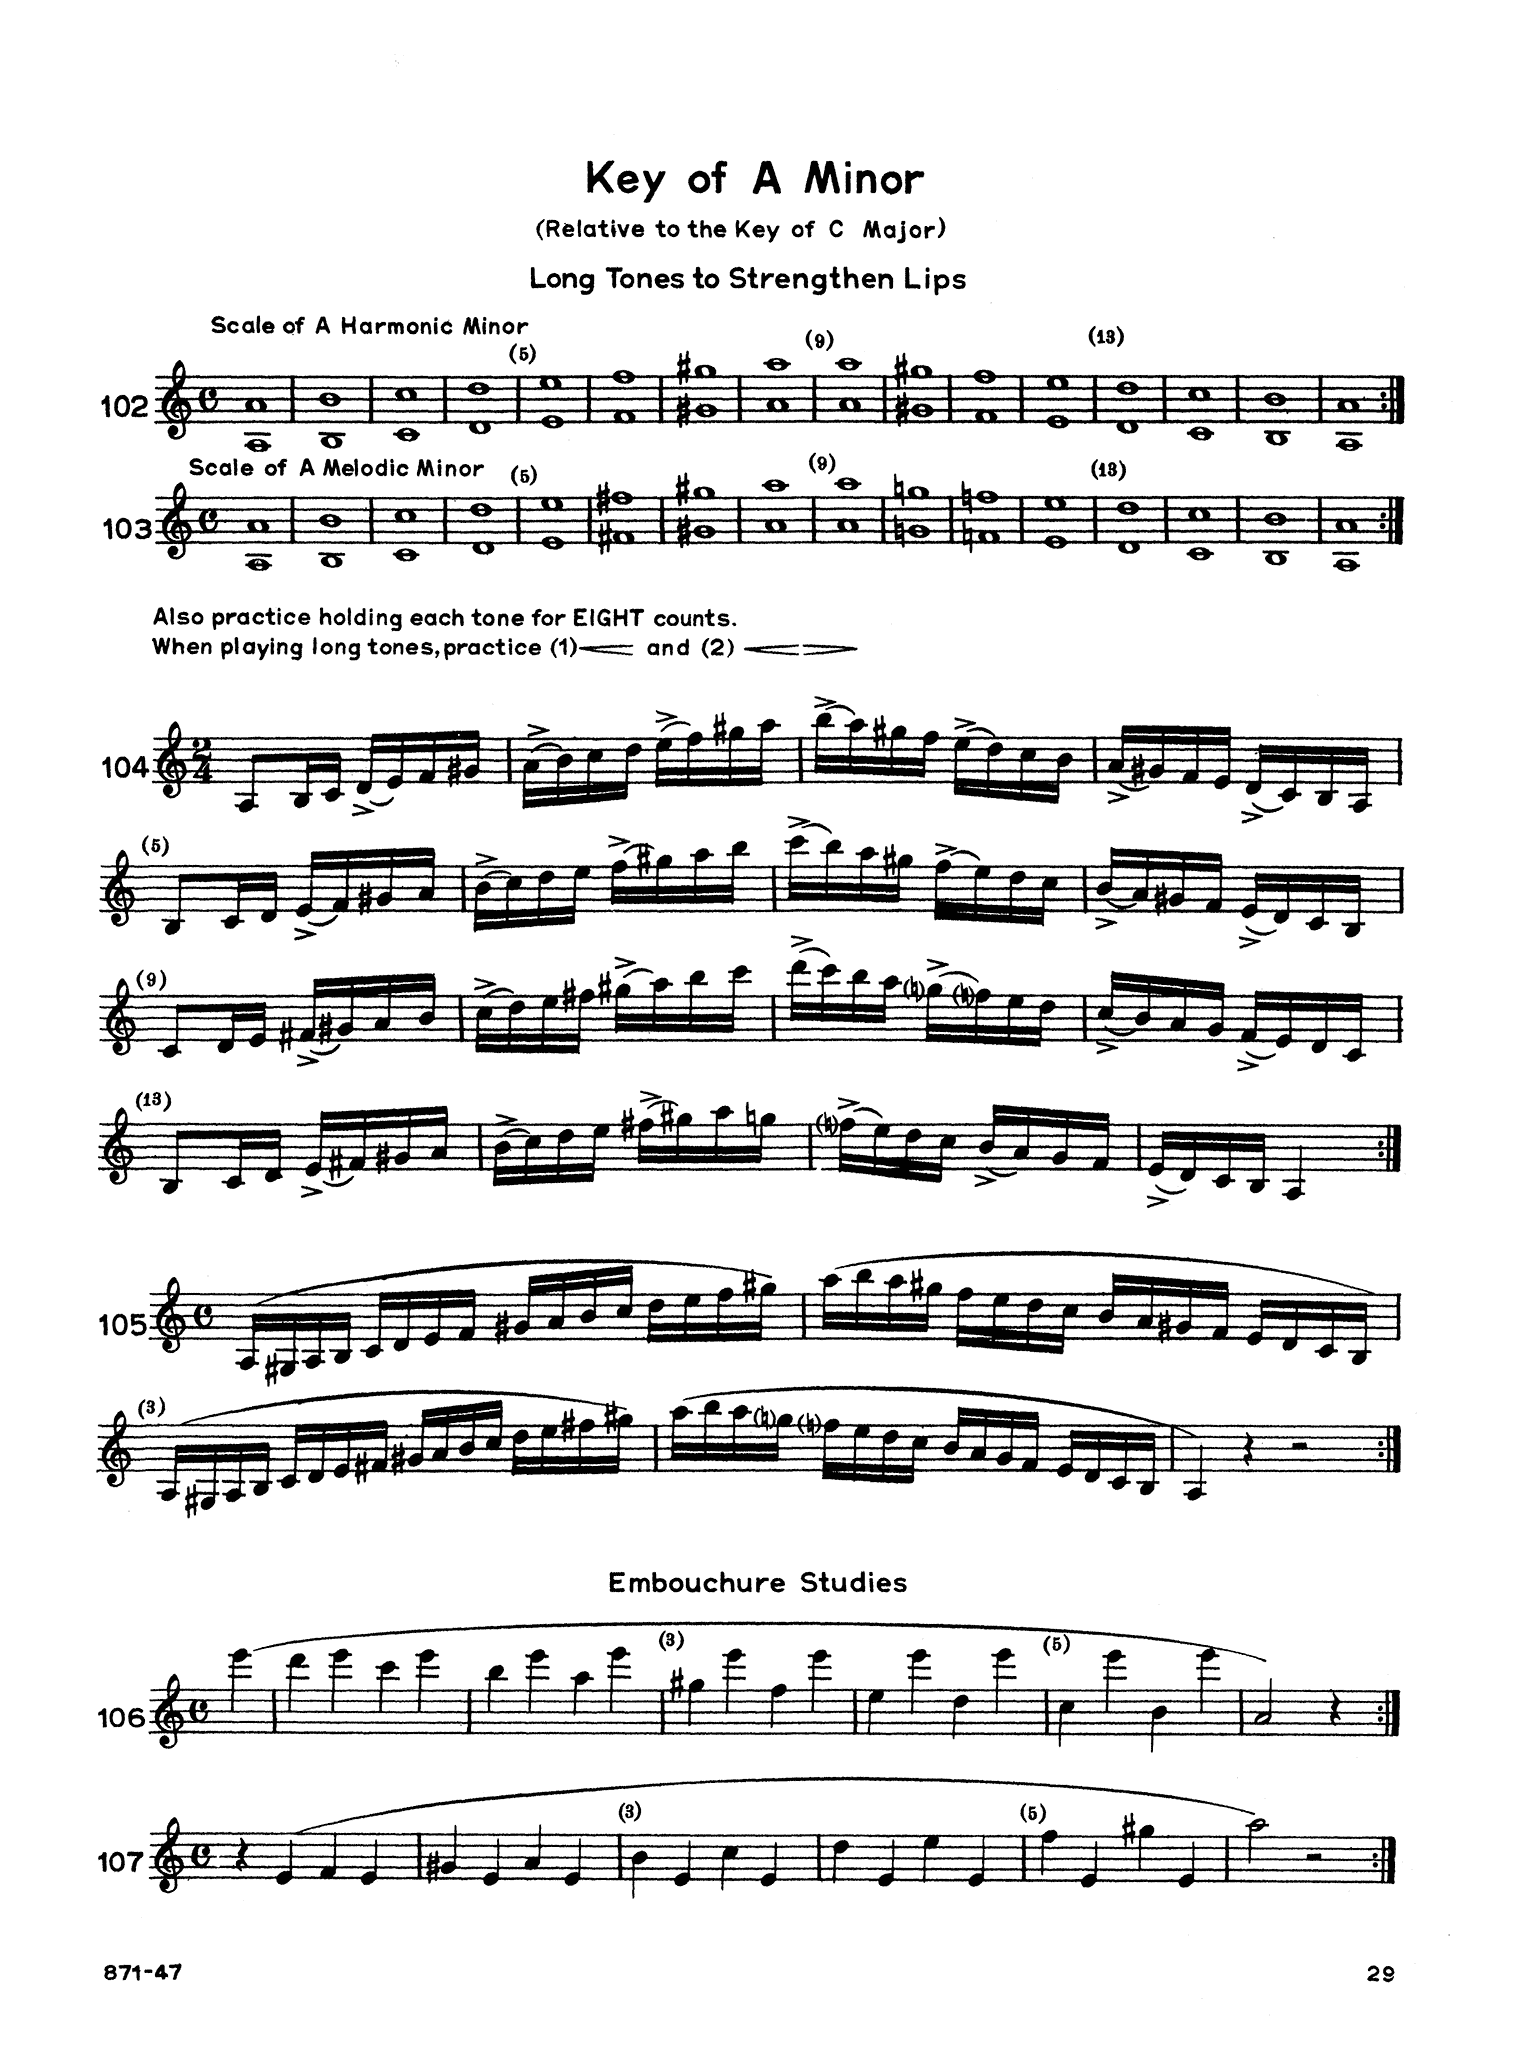 Parès Daily Exercises & Scales for Clarinet Rubank page 29